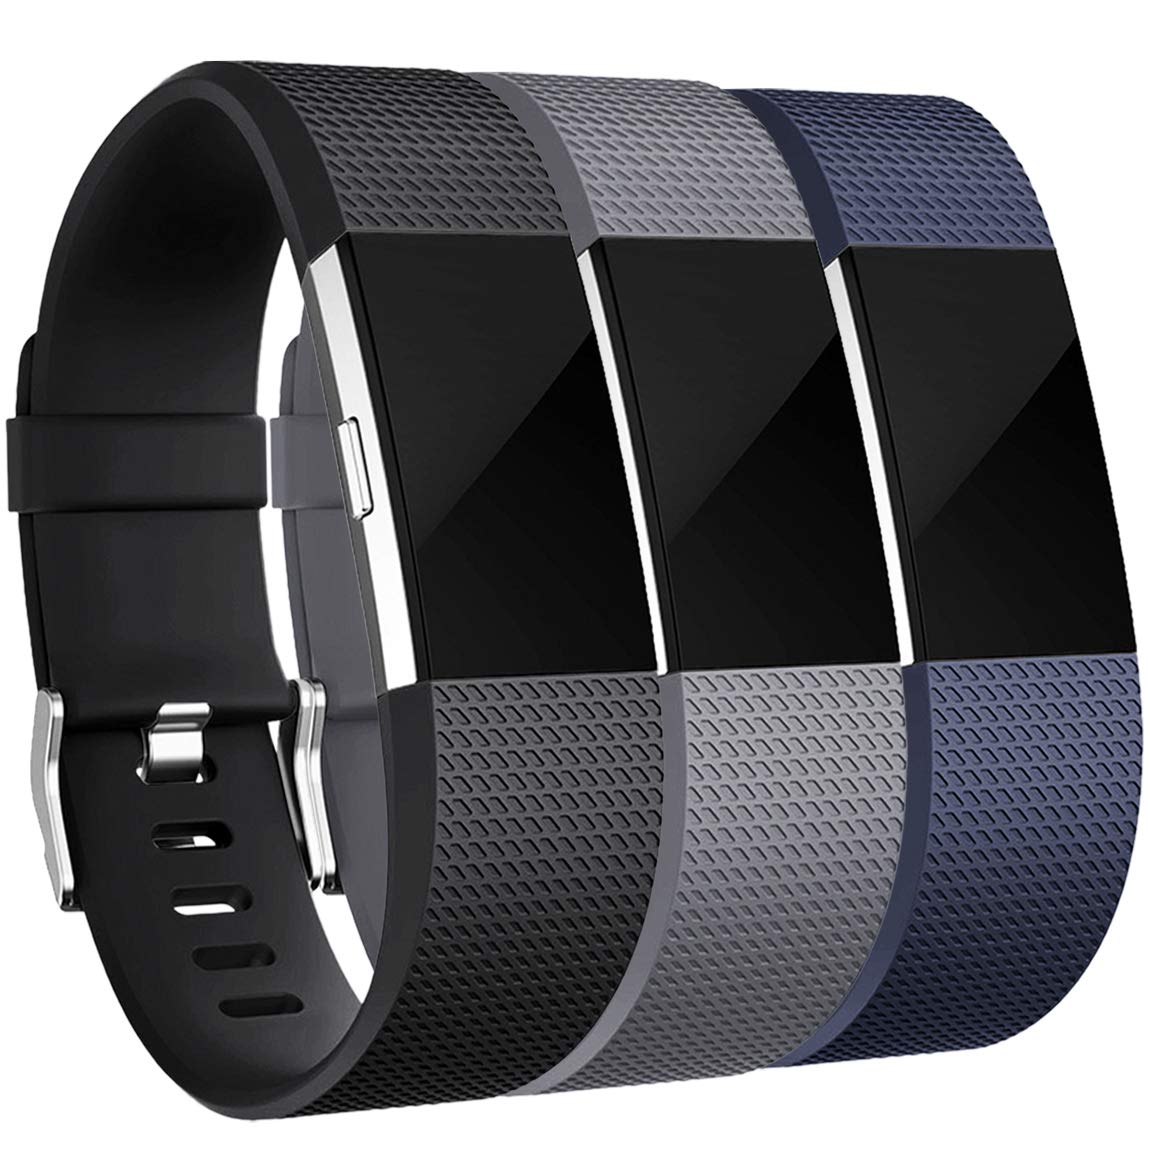 Maledan Bands Replacement Compatible with Fitbit Charge 2, 3-Pack, Large Gray/Blue/Black